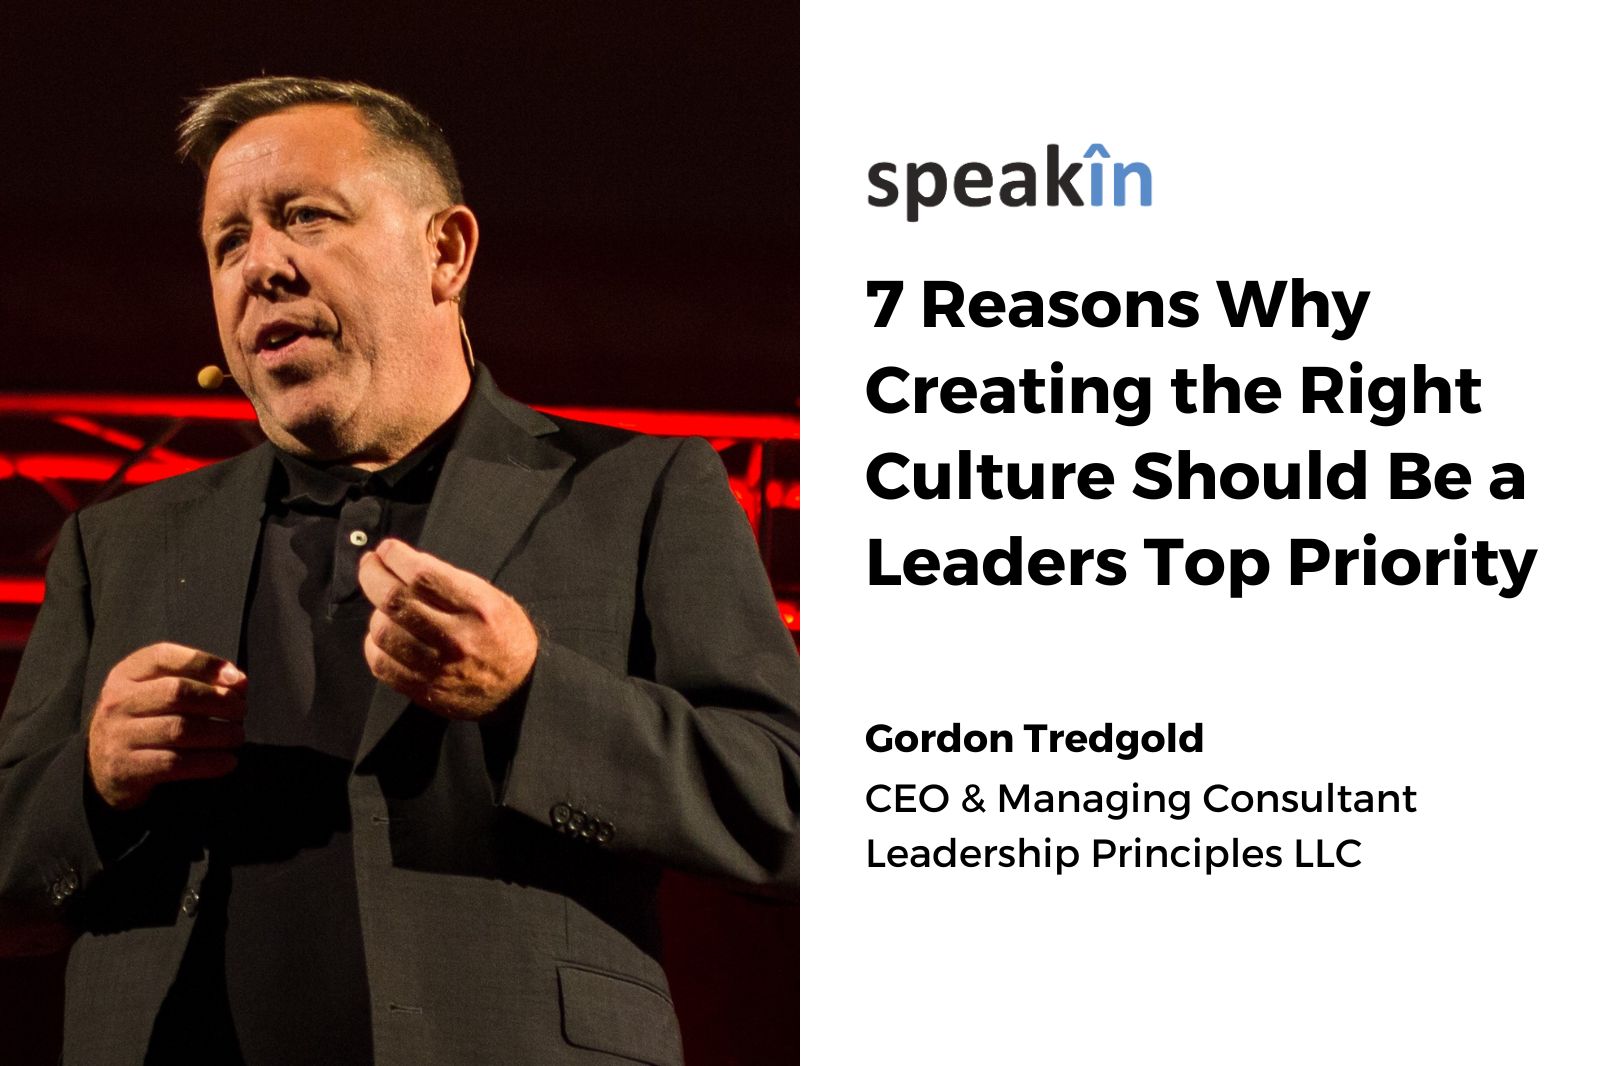 7 Reasons Why Creating the Right Culture Should Be a Leaders Top Priority